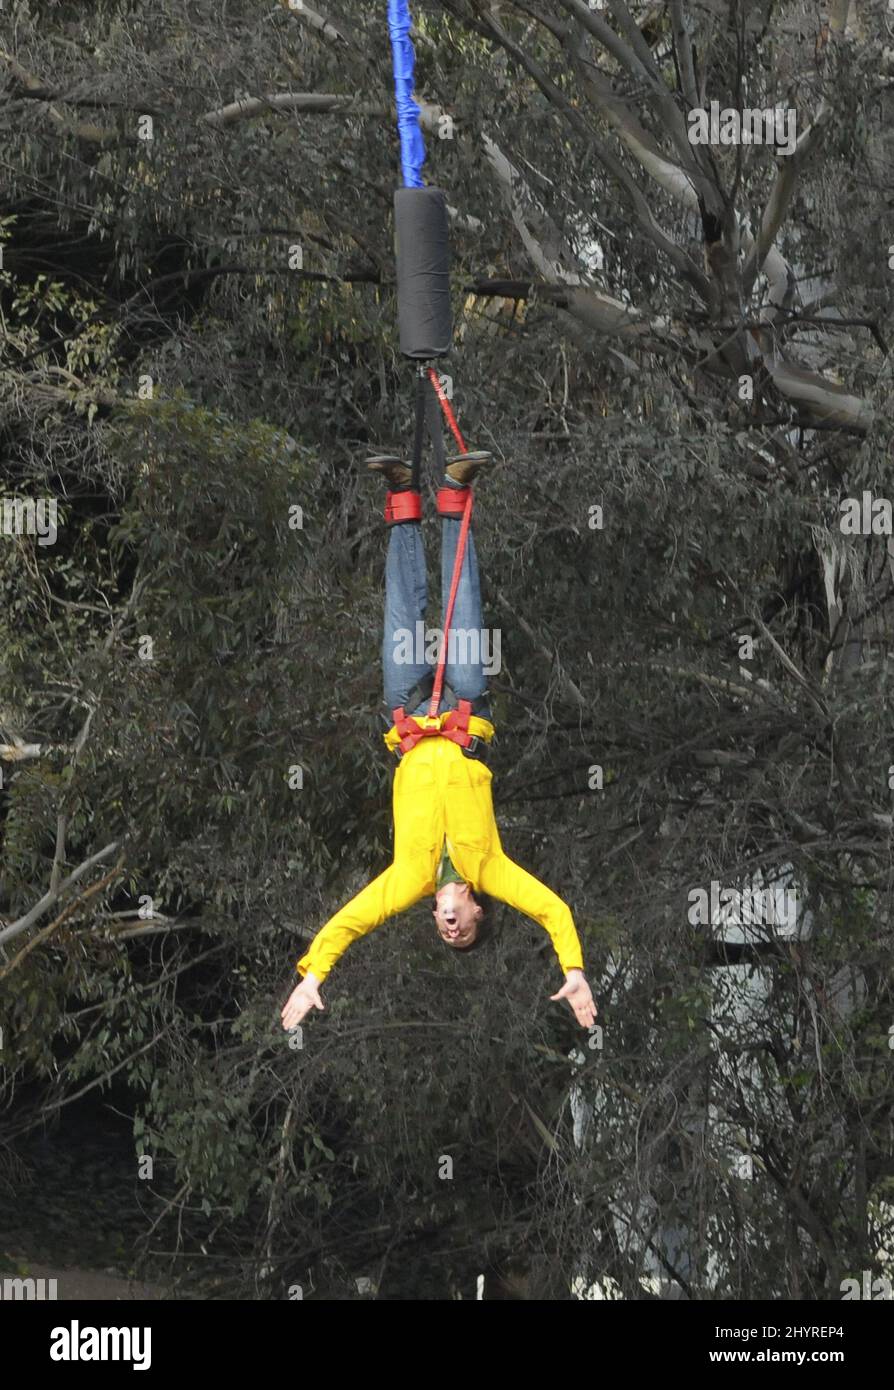 Jim Carrey bungee jumps during filming of his new movie 'Yes Man' held at the Arroyo Seco Bridge in Pasadena, CA. Stock Photo